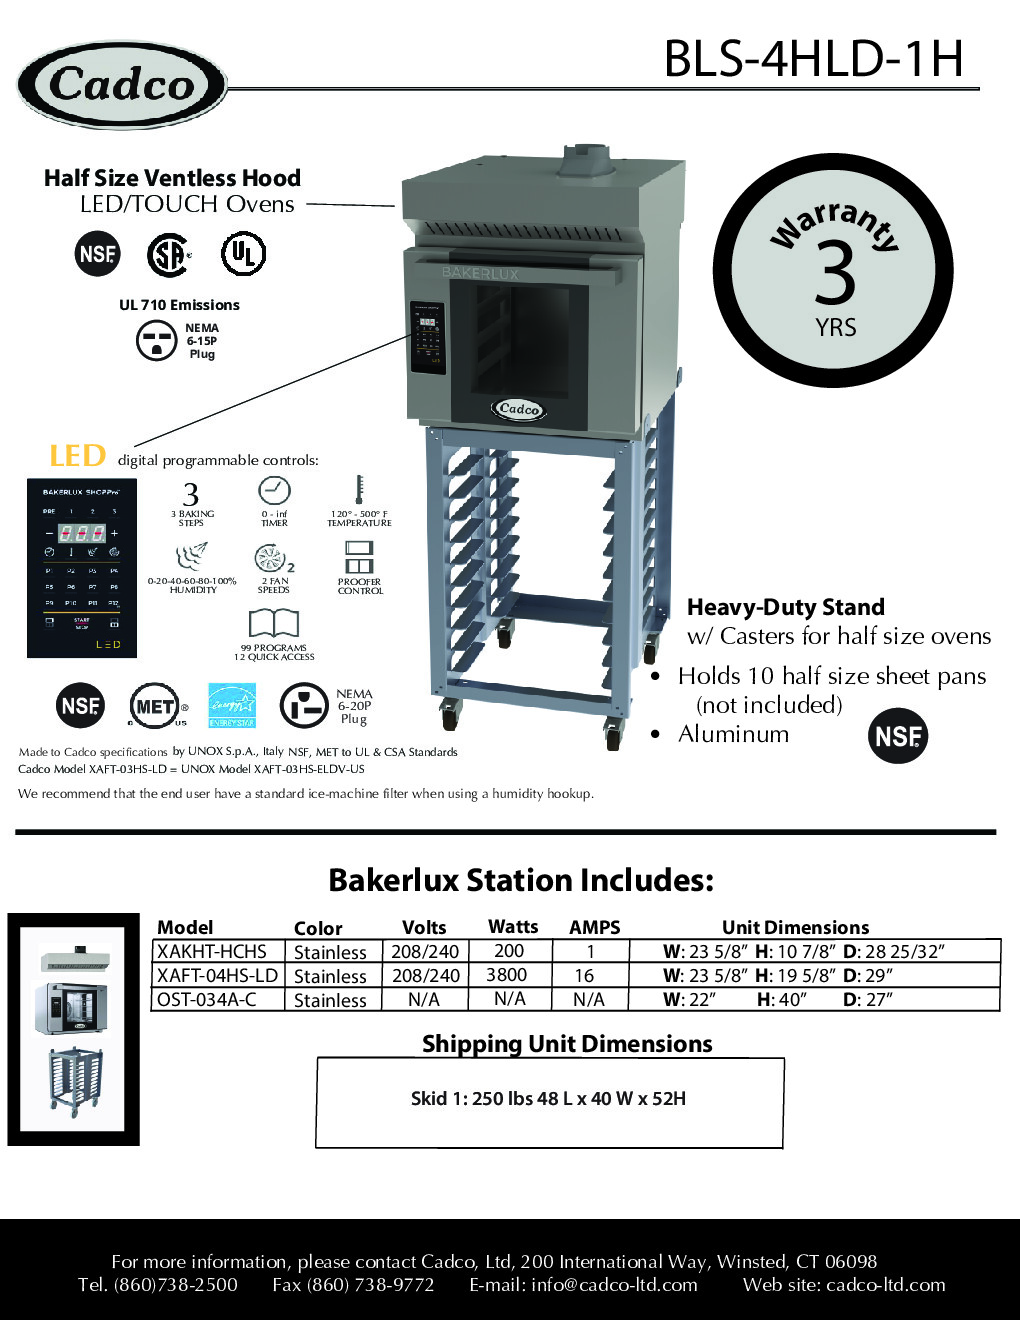 Cadco BLS-4HLD-1H Single-Deck Electric Convection Oven w/ Digital Touch Controls, Haf-Size